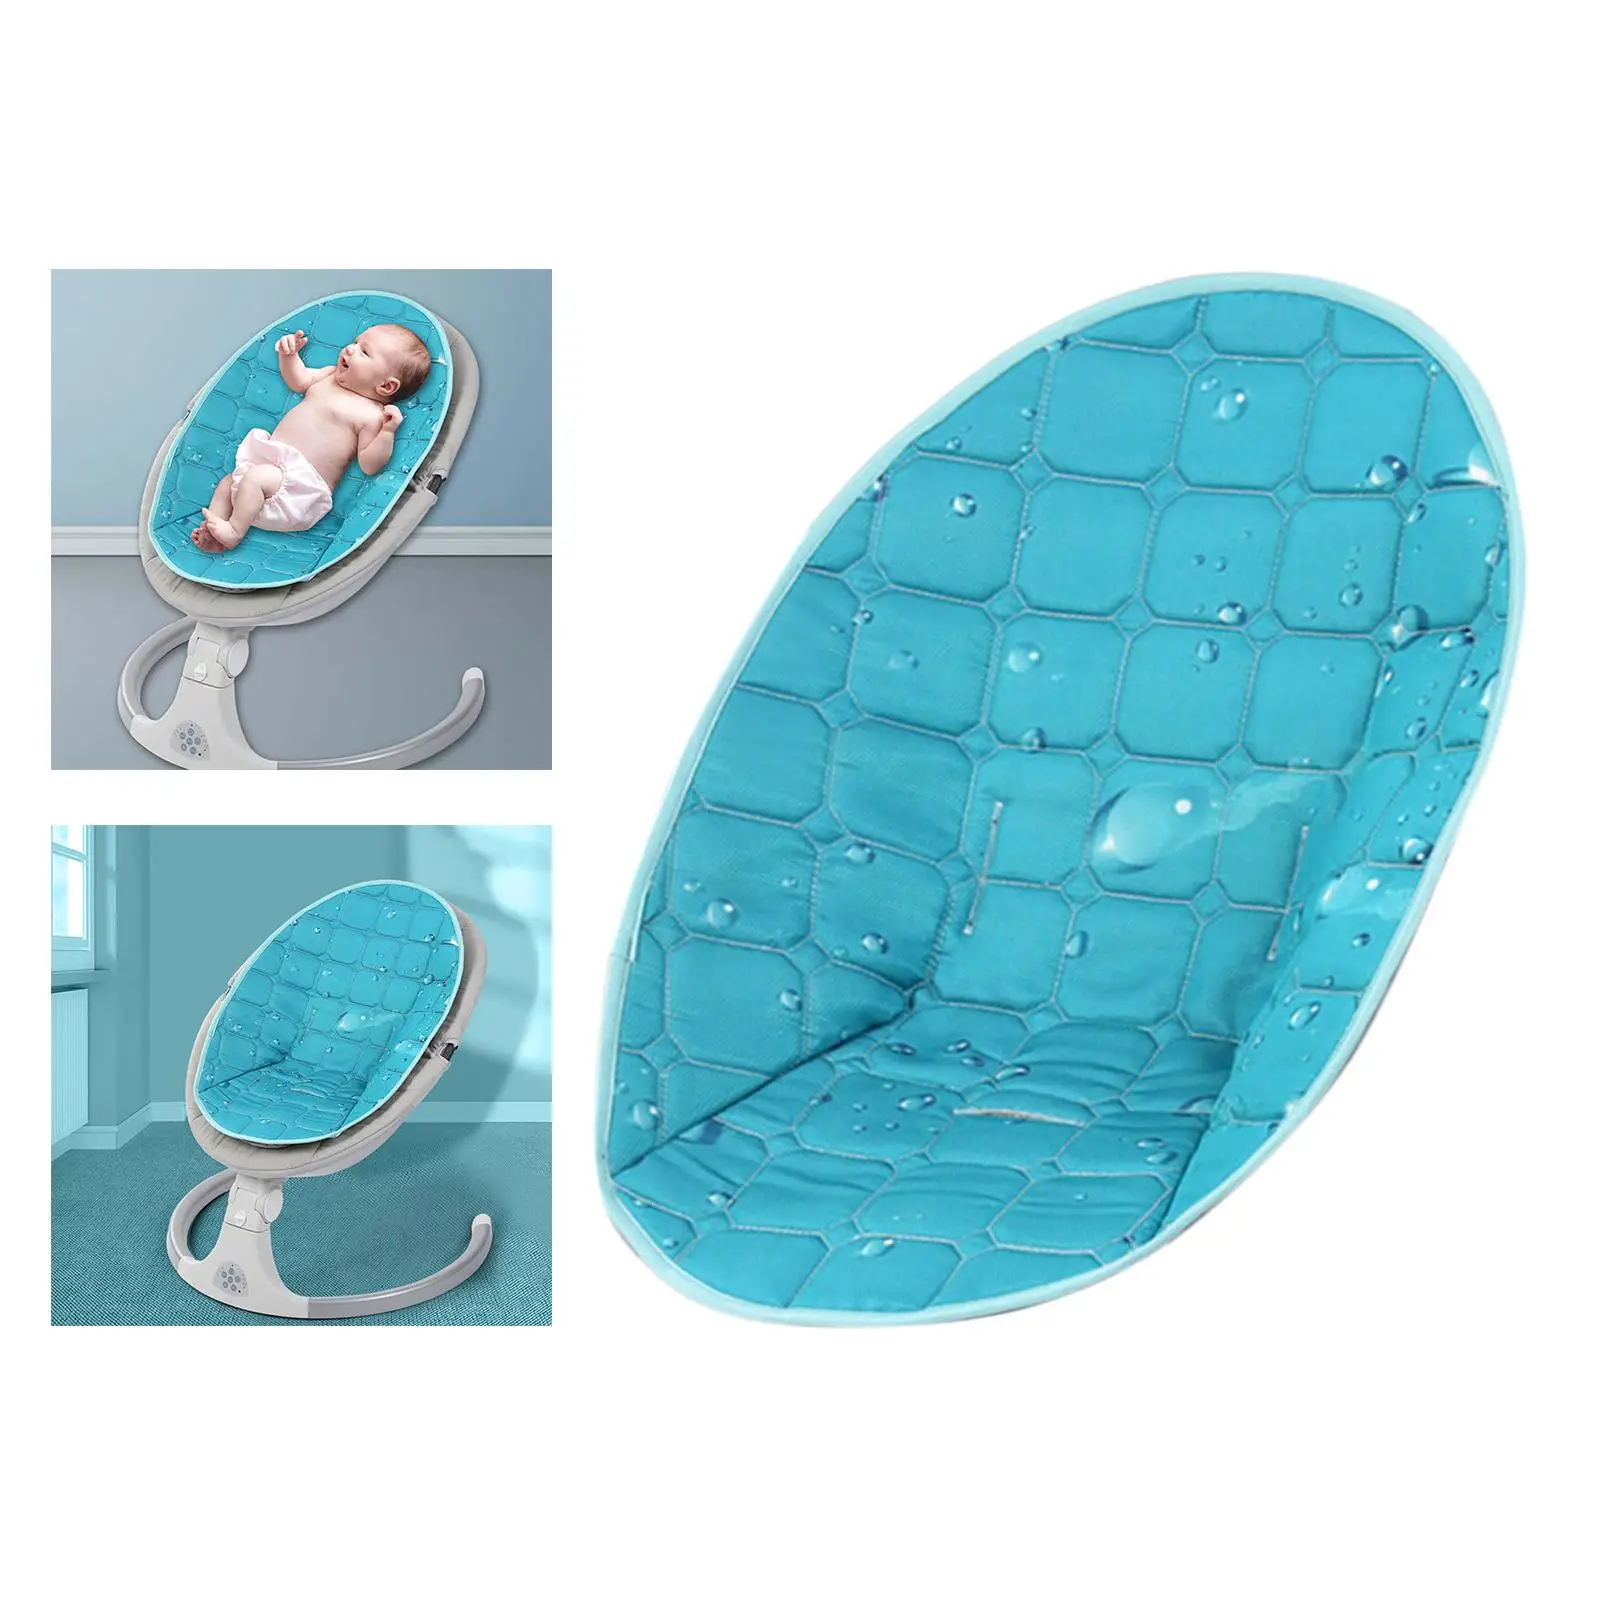 Electric Baby Bouncer Seat Pad Breathable Toddler Rocker Swing Chair Cushion Liner Pad Electric Rocking Chair Safety Seat Pad